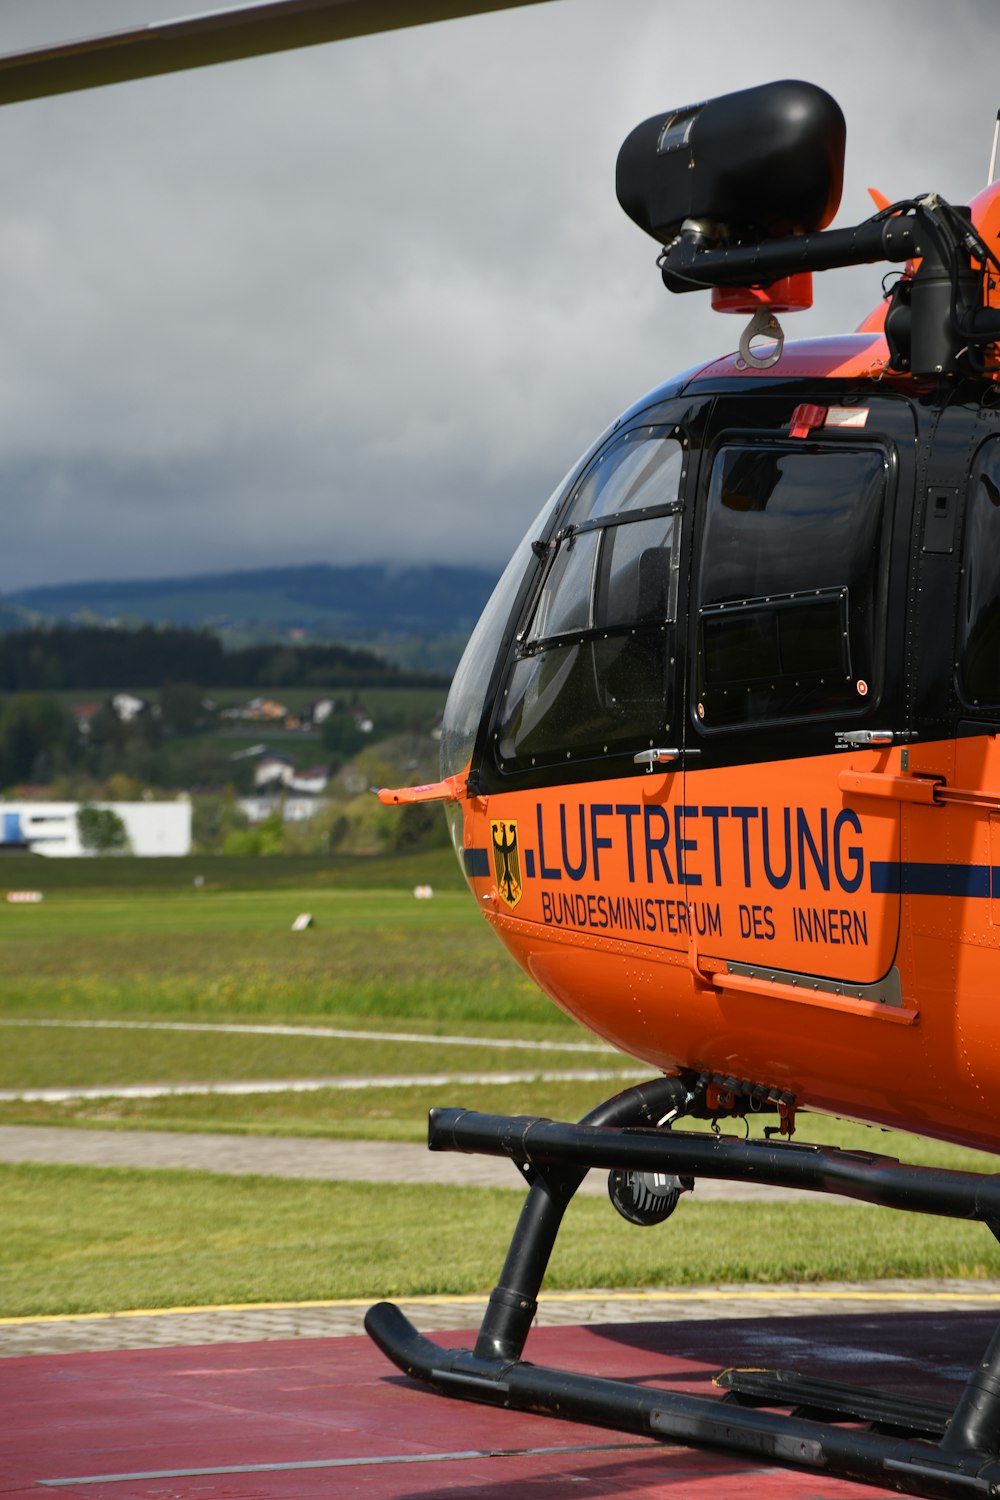 orange and black helicopter on green grass field during daytime